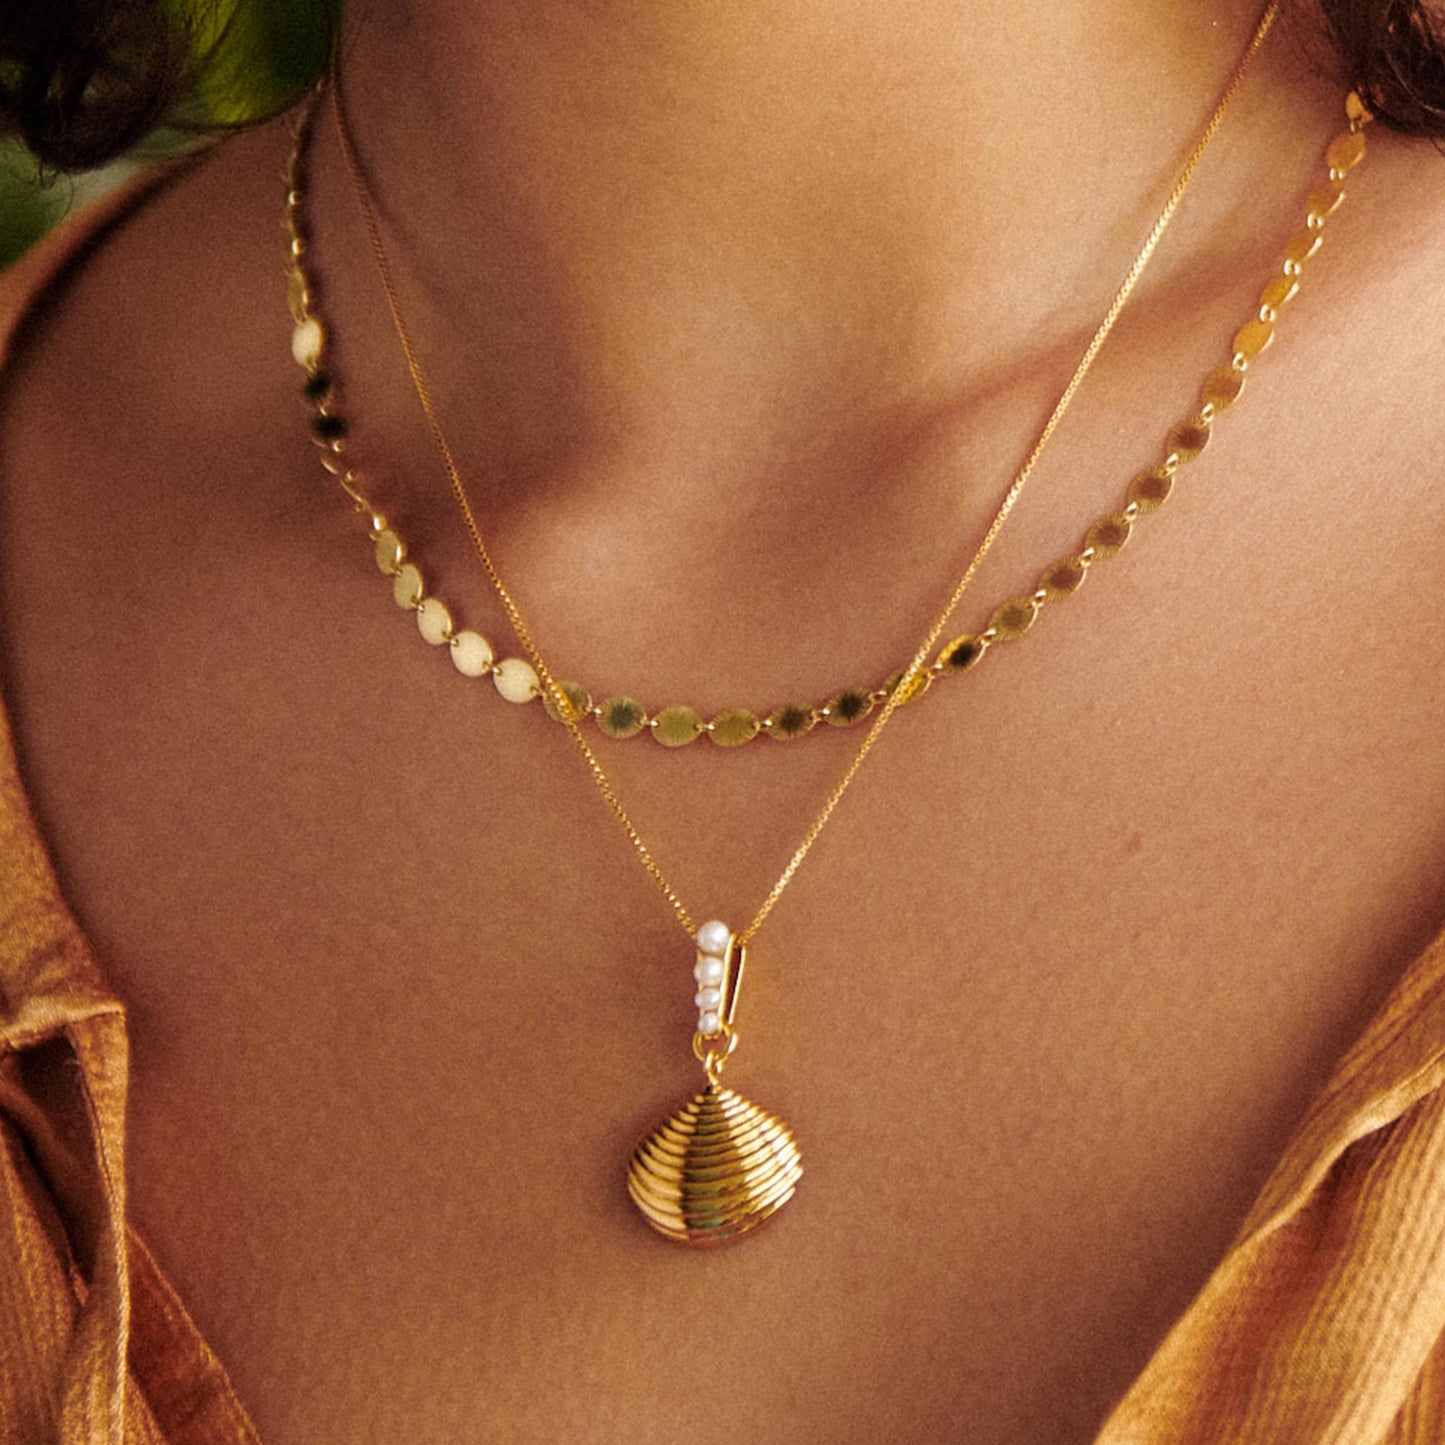 Treasured Shell Necklace